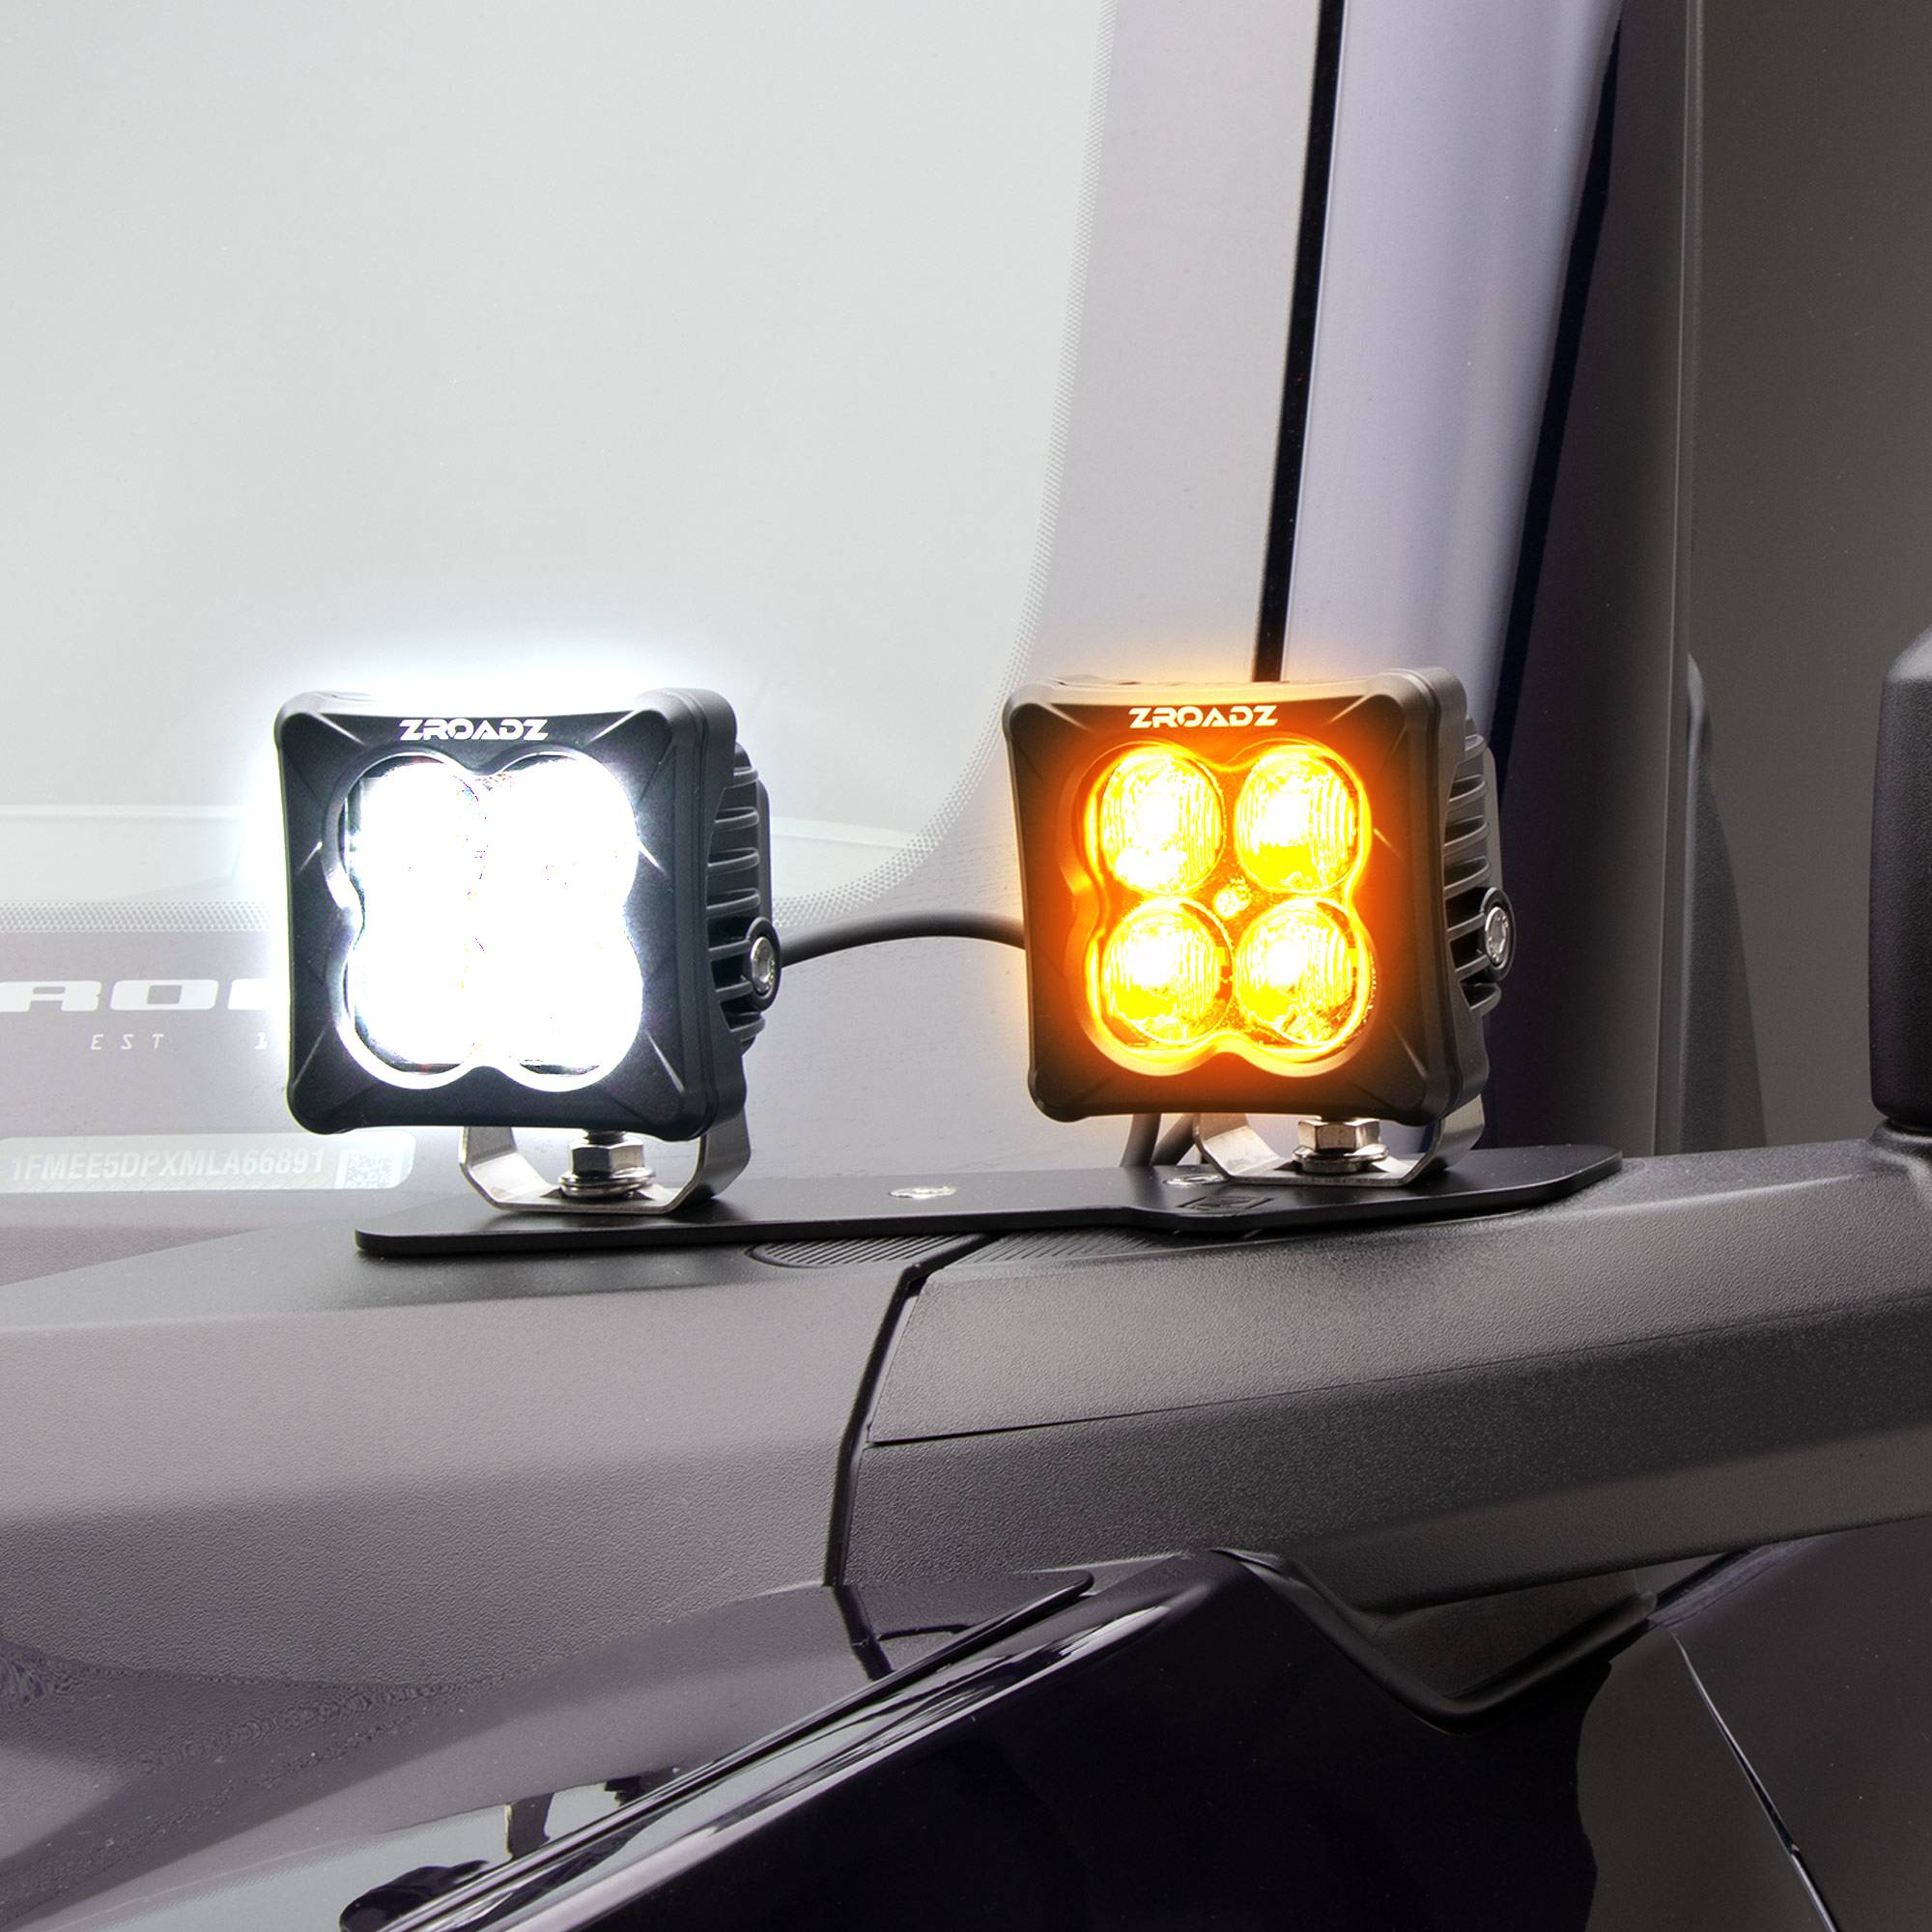 ZROADZ OFF ROAD PRODUCTS - 2021-2022 Ford Bronco Mirror/Ditch Light LED KIT, Includes (2) 3 inch ZROADZ White and (2) Amber LED Pod Lights - Part # Z365401-KIT4AW